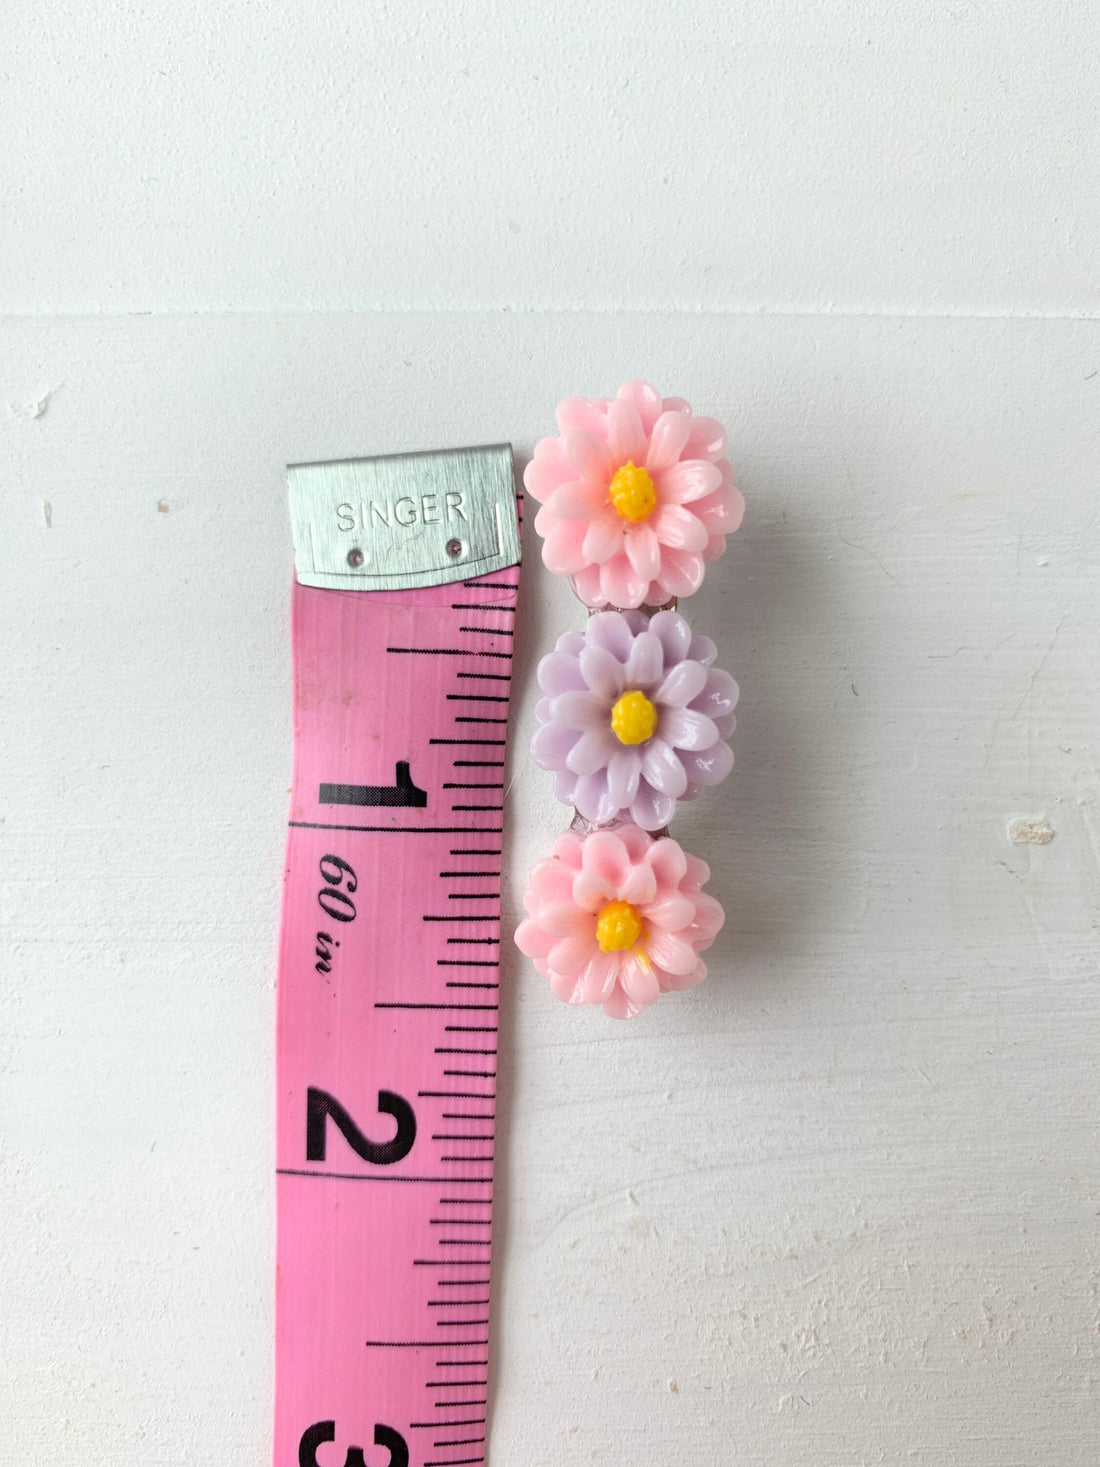 Lenora Dame LD Kids Hair Barrette in Cotton Candy